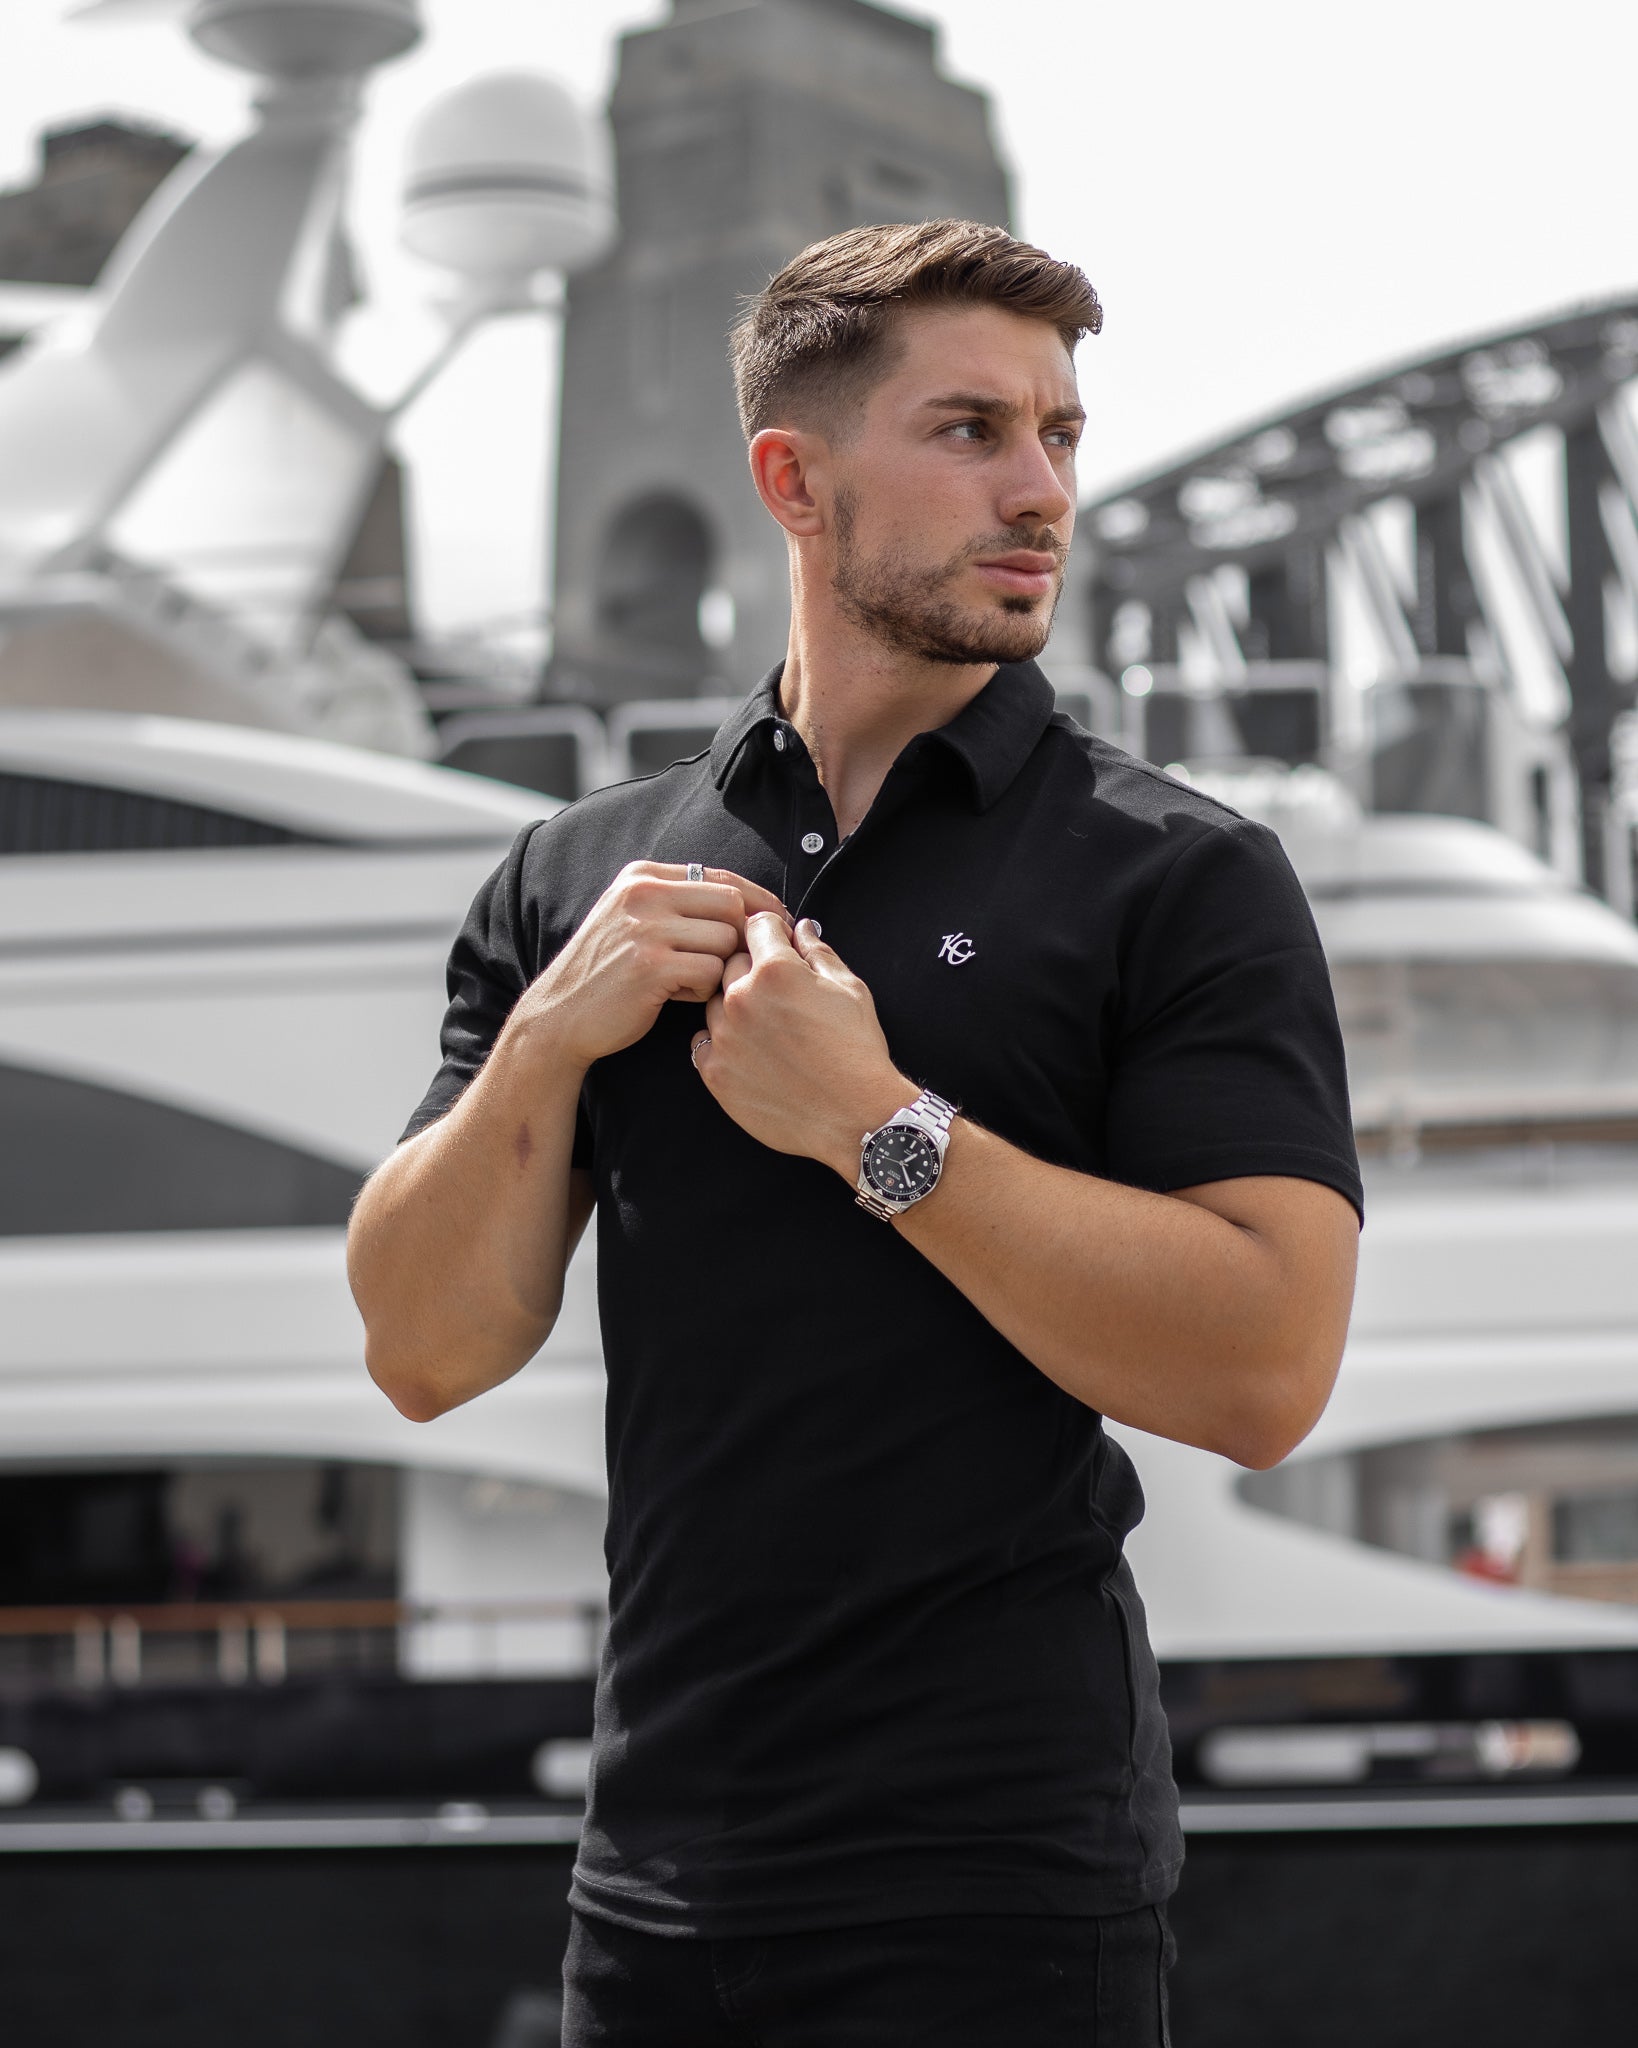 Men's Essential Midnight Black Muscle Fit Polo Shirt